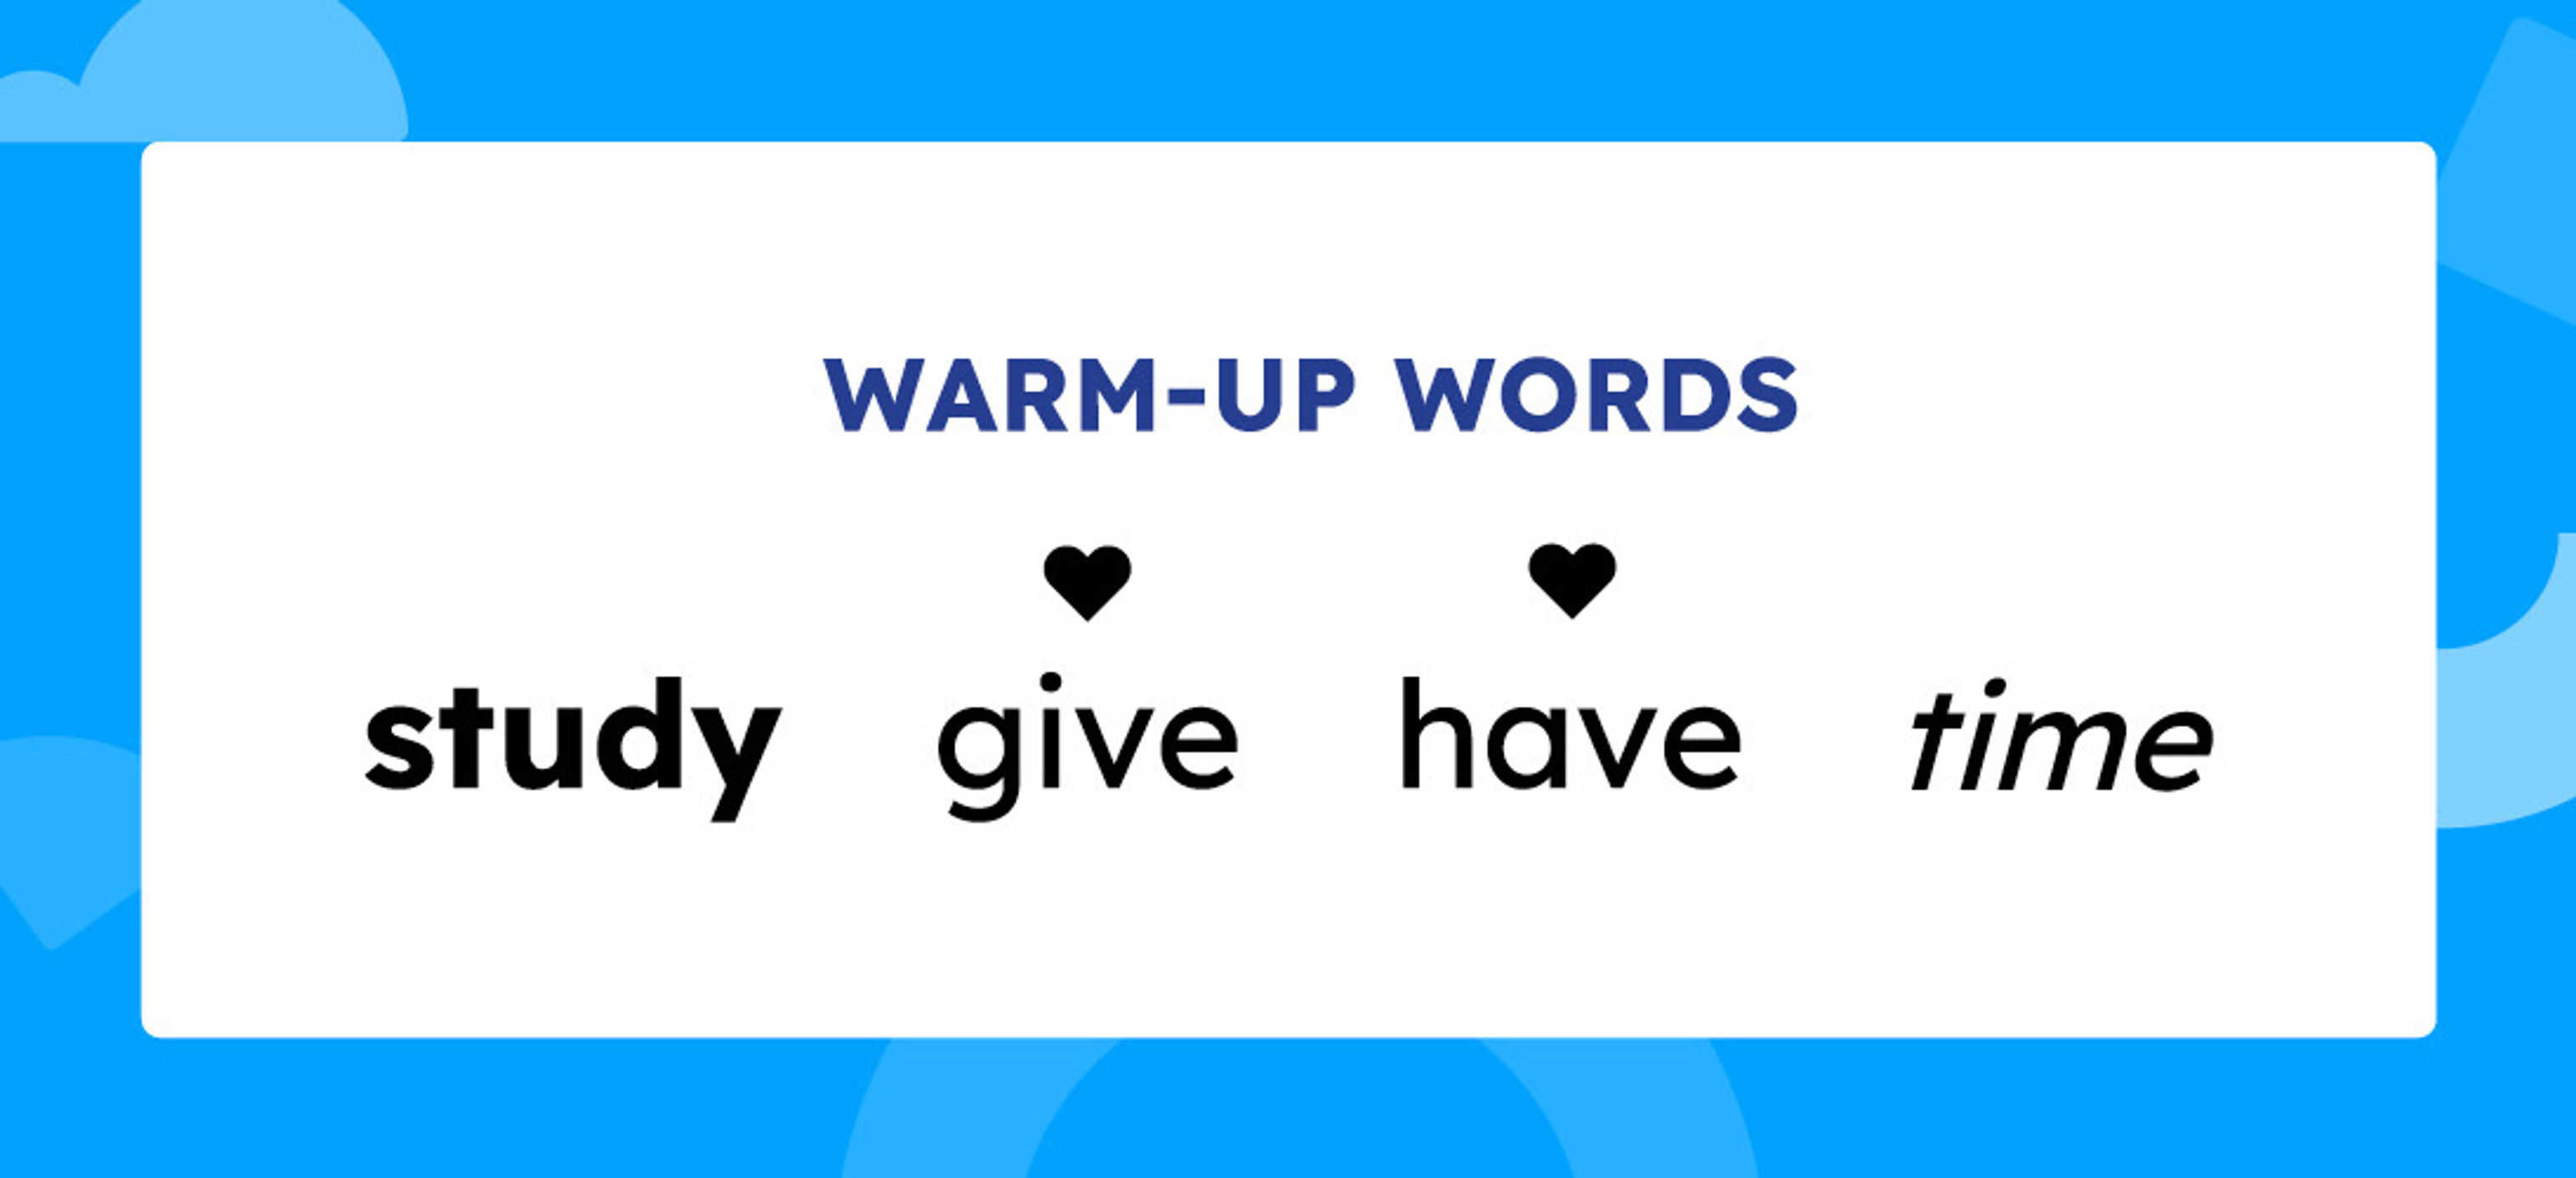 decodable text warm-up word sample: study, give, have, time